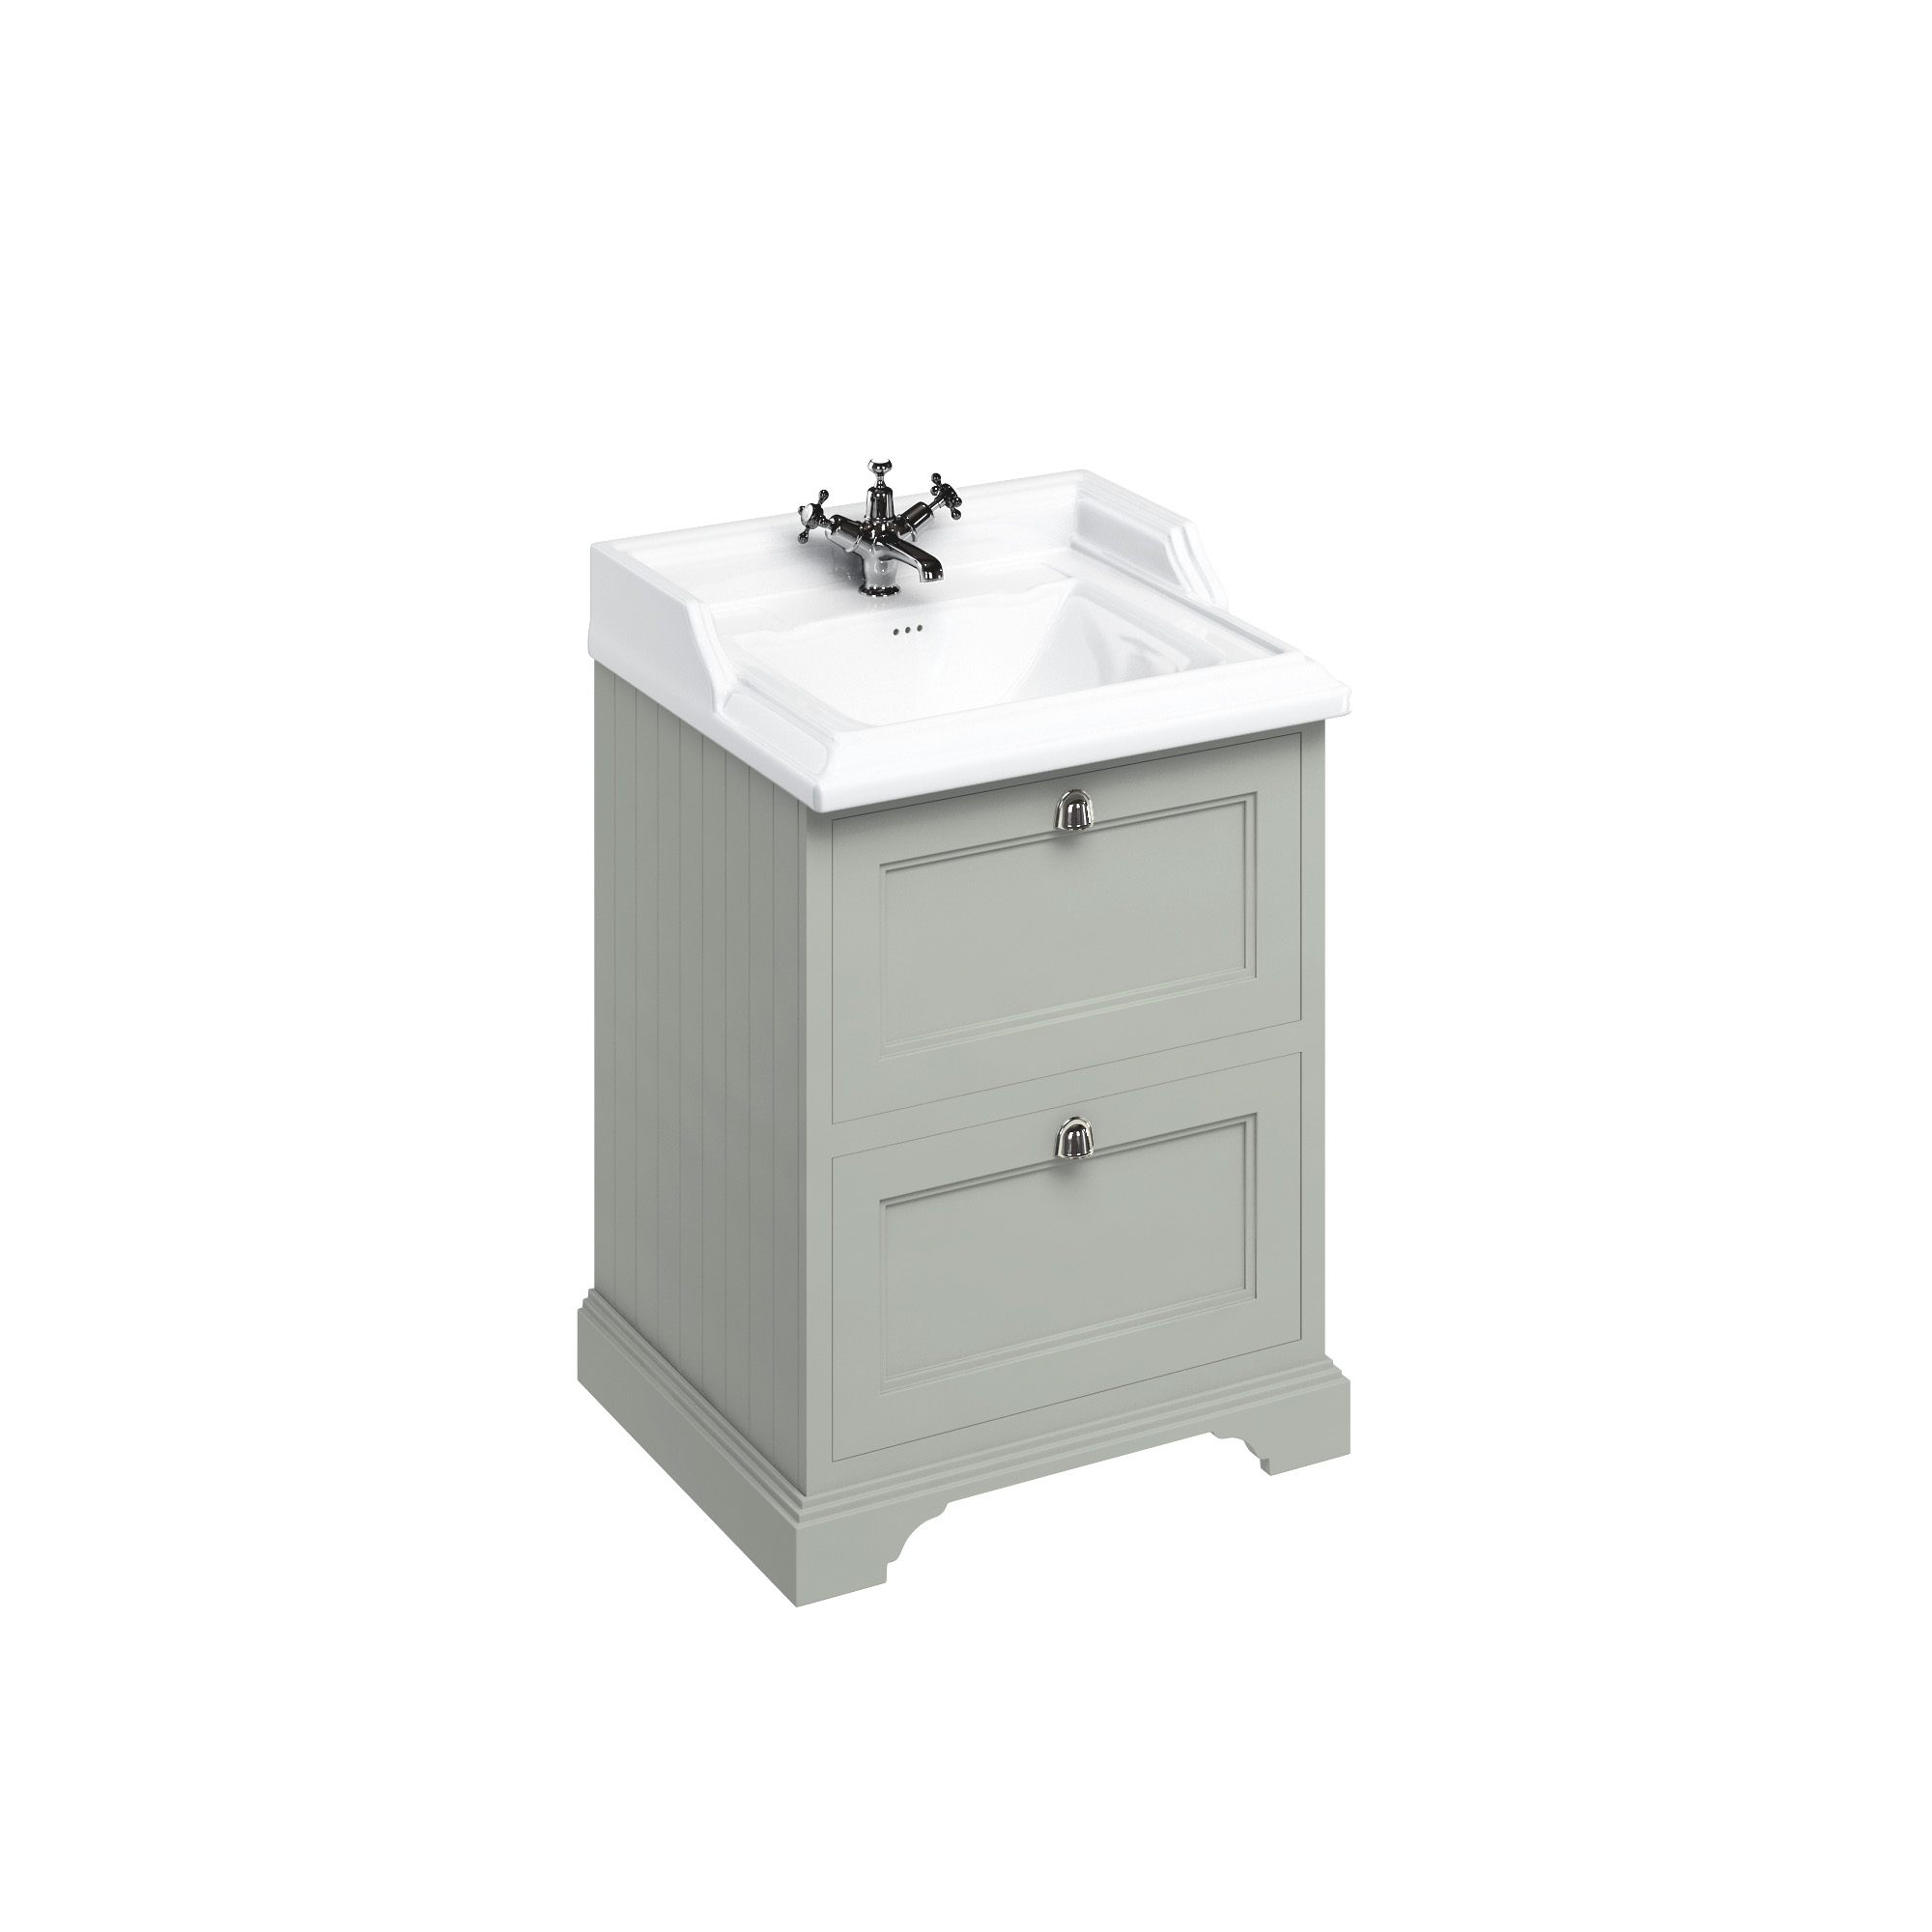 Freestanding 65 Vanity Unit with 2 drawers - Dark Olive and Classic basin 1 tap hole